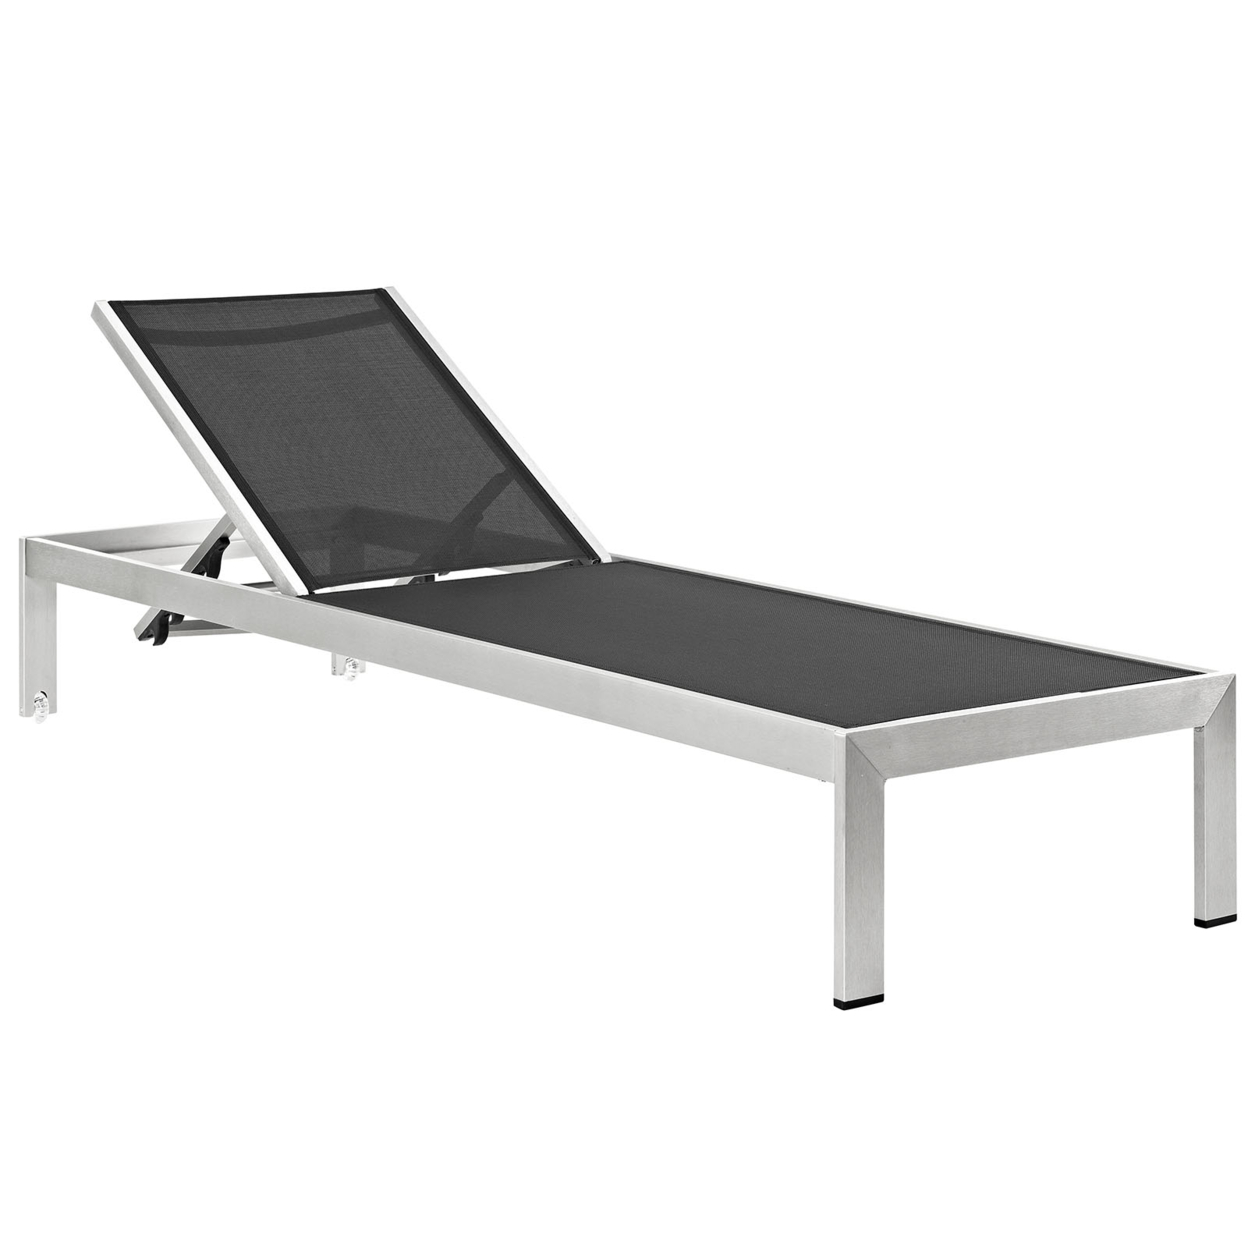 Shore Outdoor Patio Aluminum Chaise with Cushions Silver gray - image 2 of 5